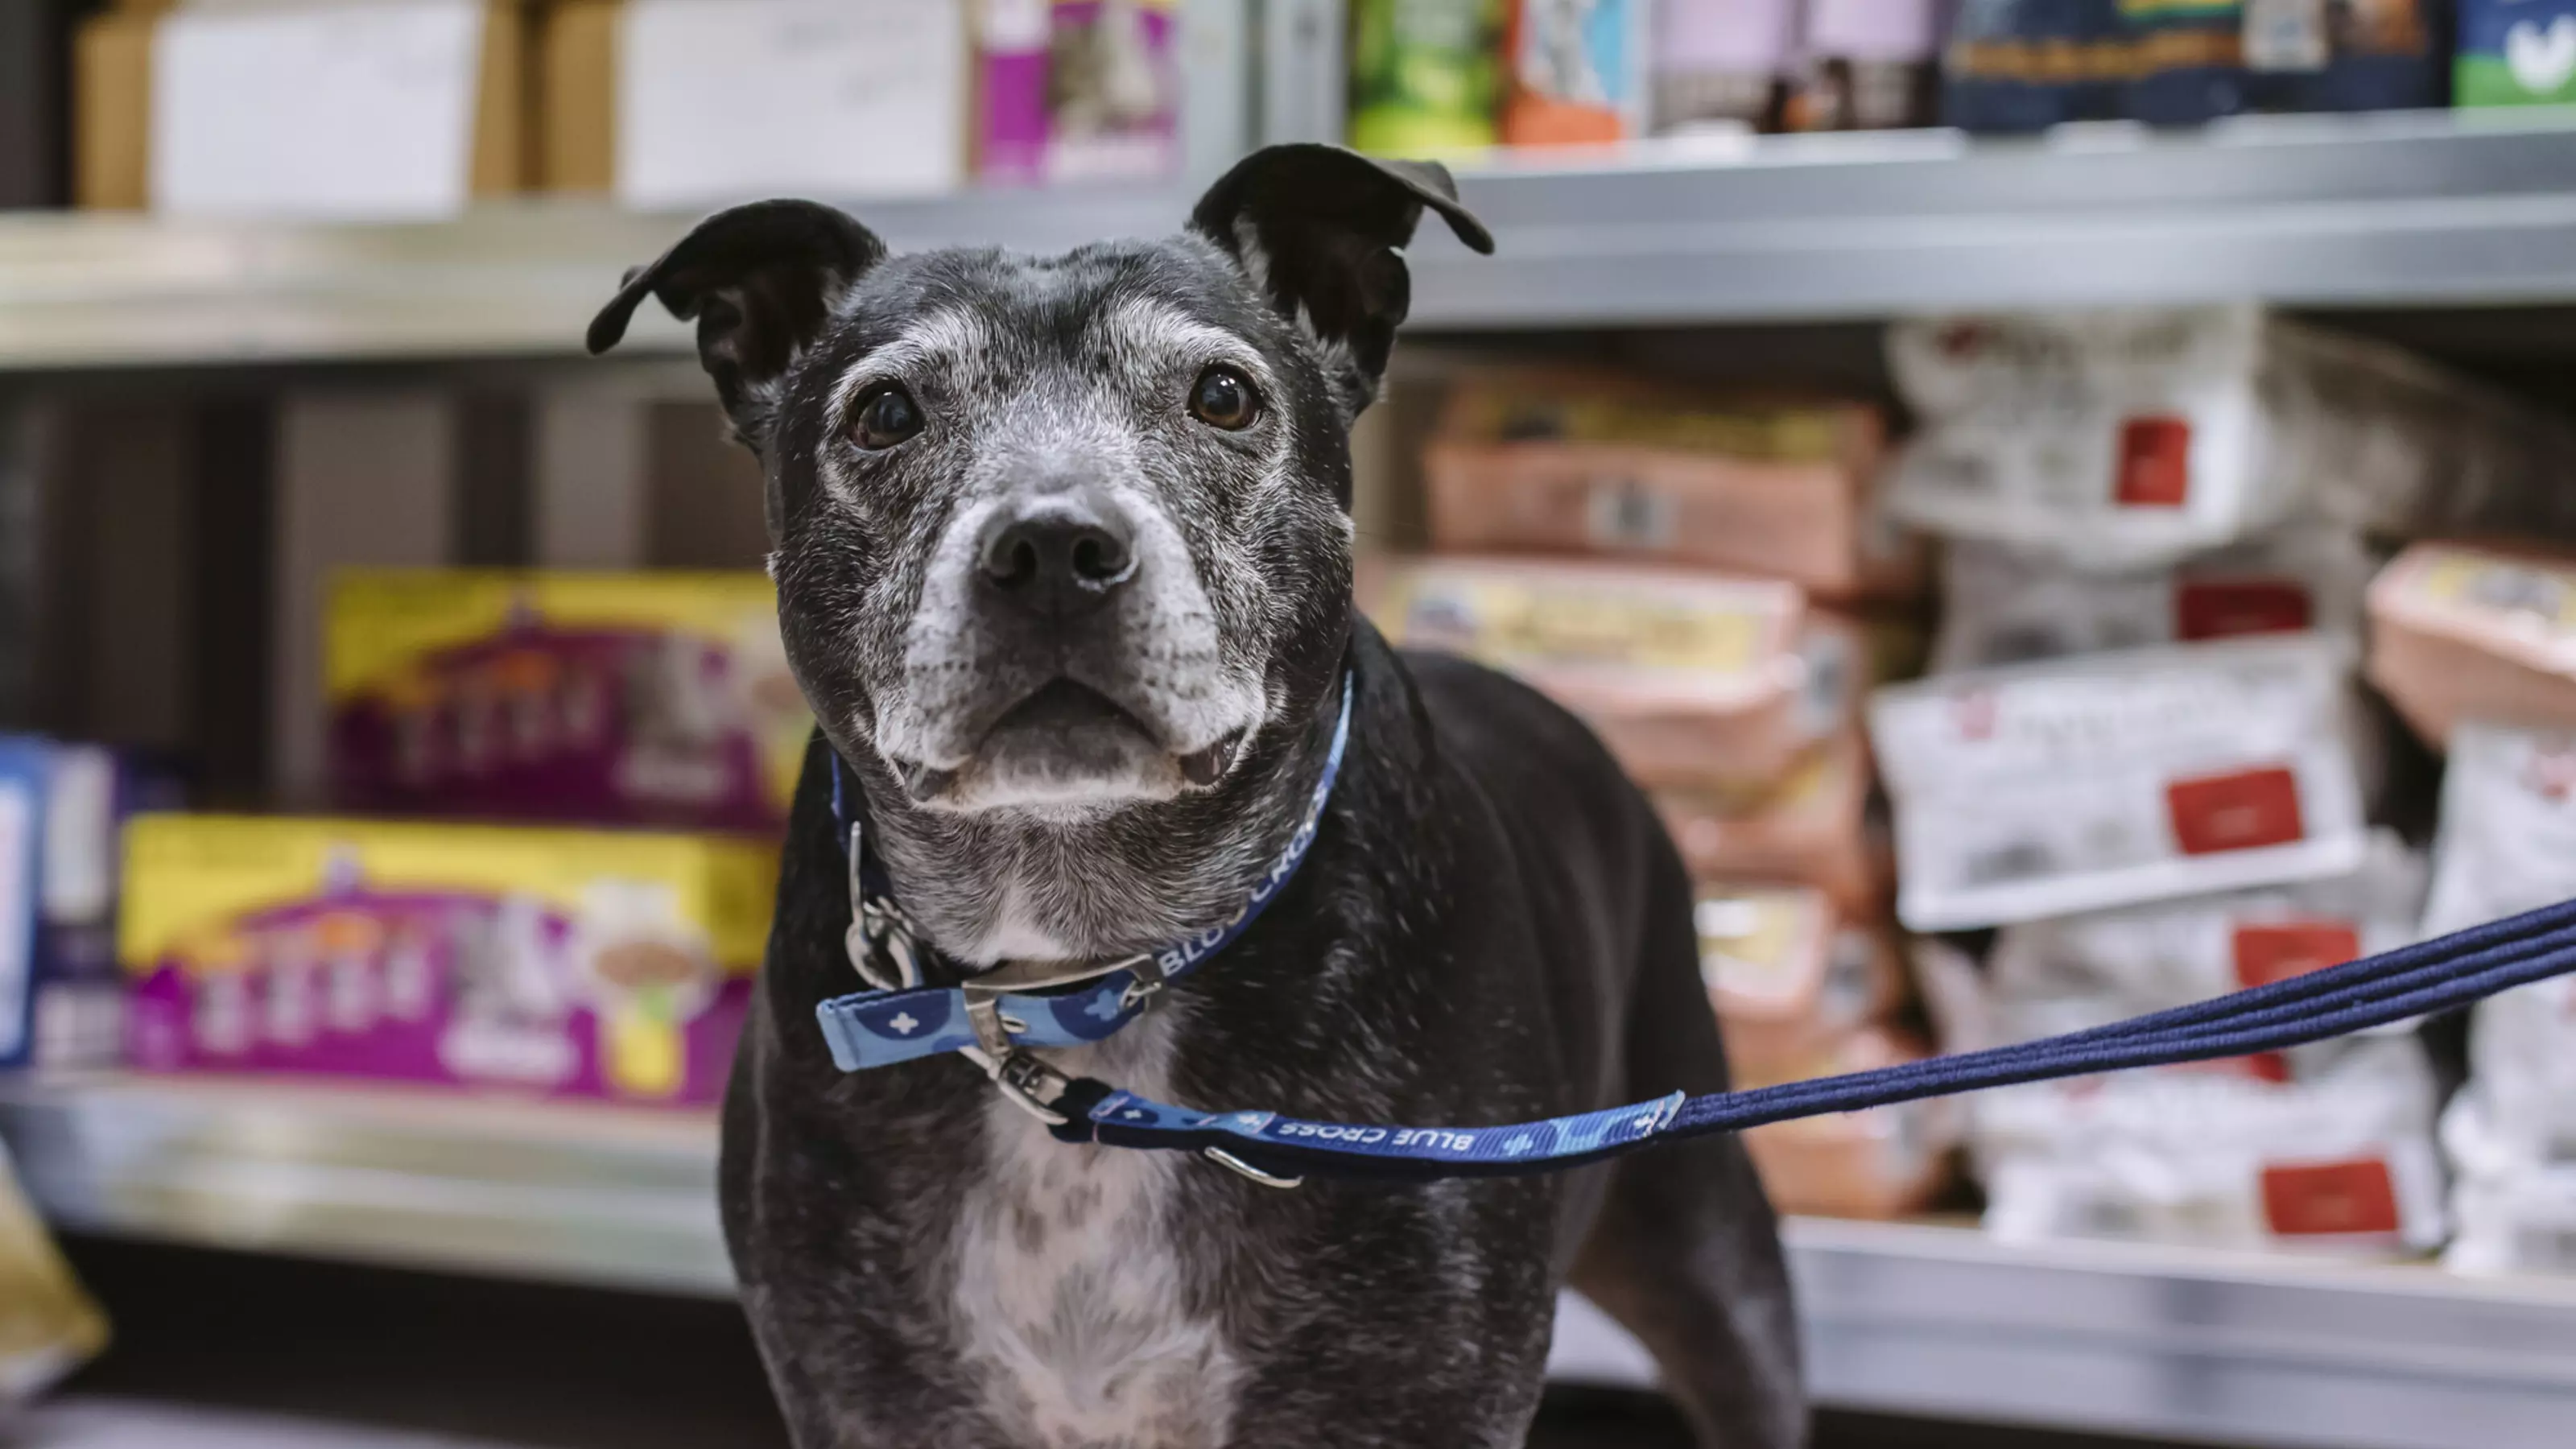 An old, greying staffie looks towards the camera. In the background are shelves full of pet food.